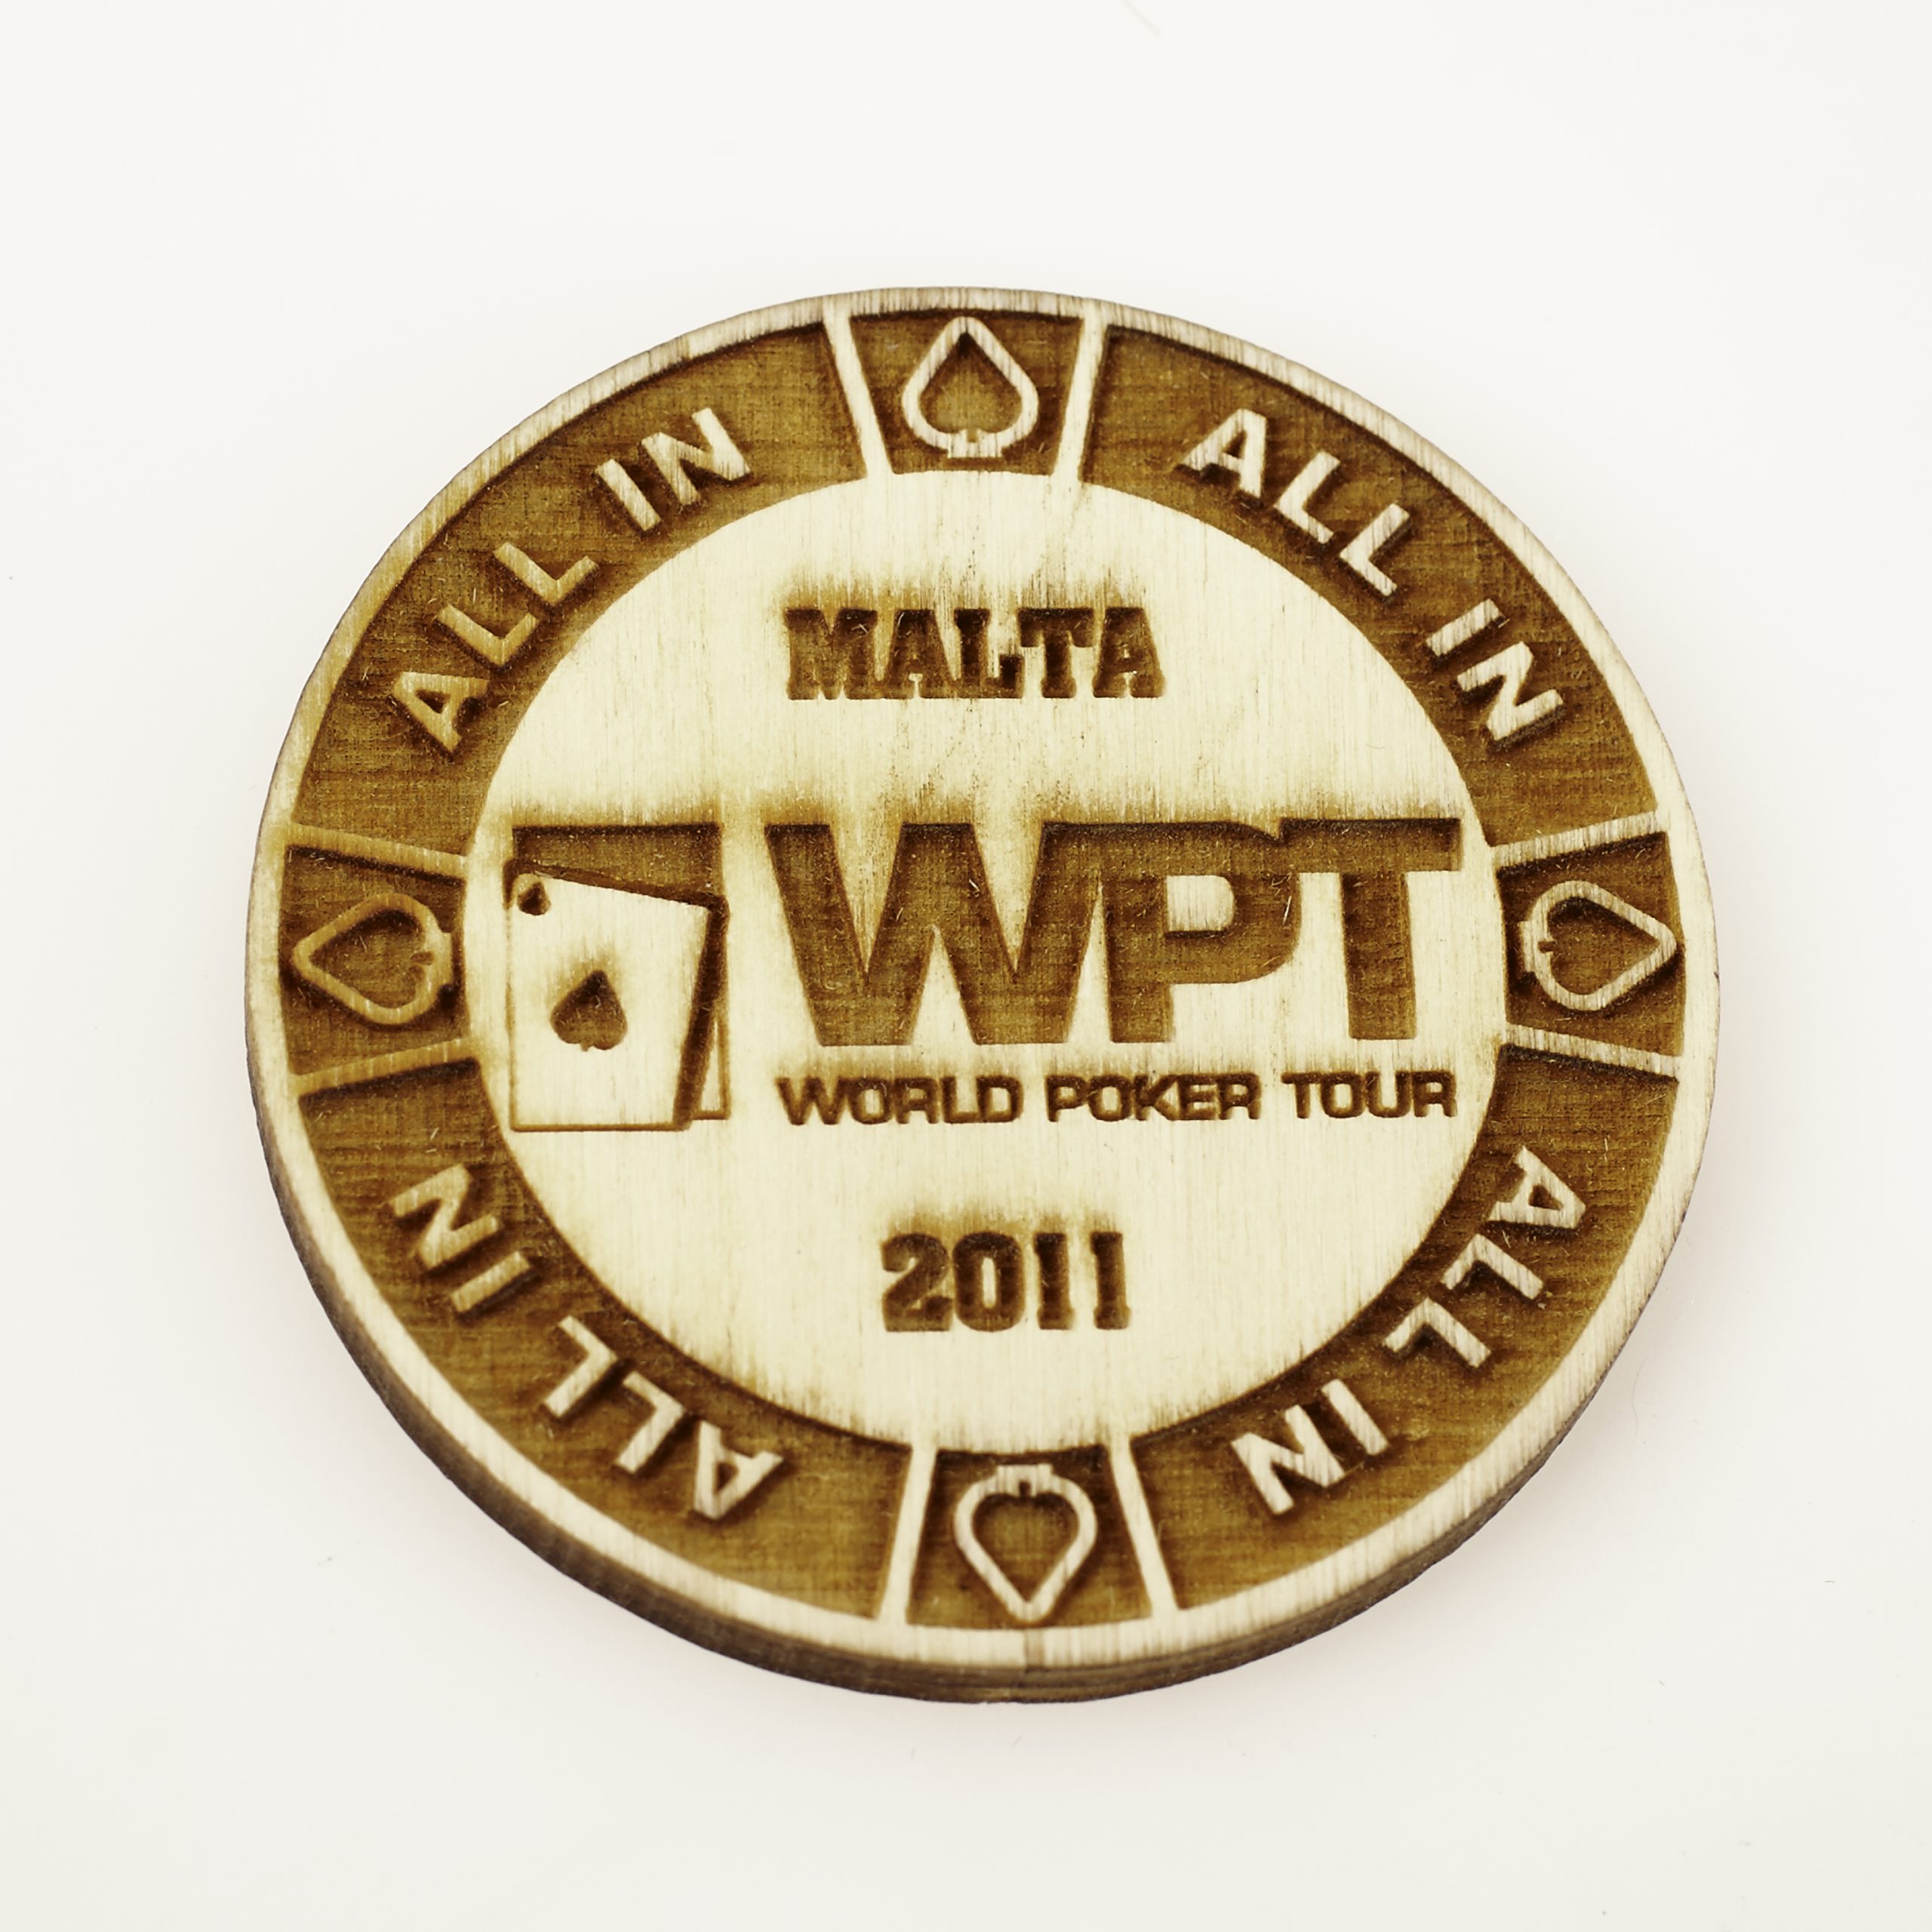 WPT WORLD POKER TOUR 2011, ALL IN ALL IN, Poker Card Guard Dealer Button (Wood)